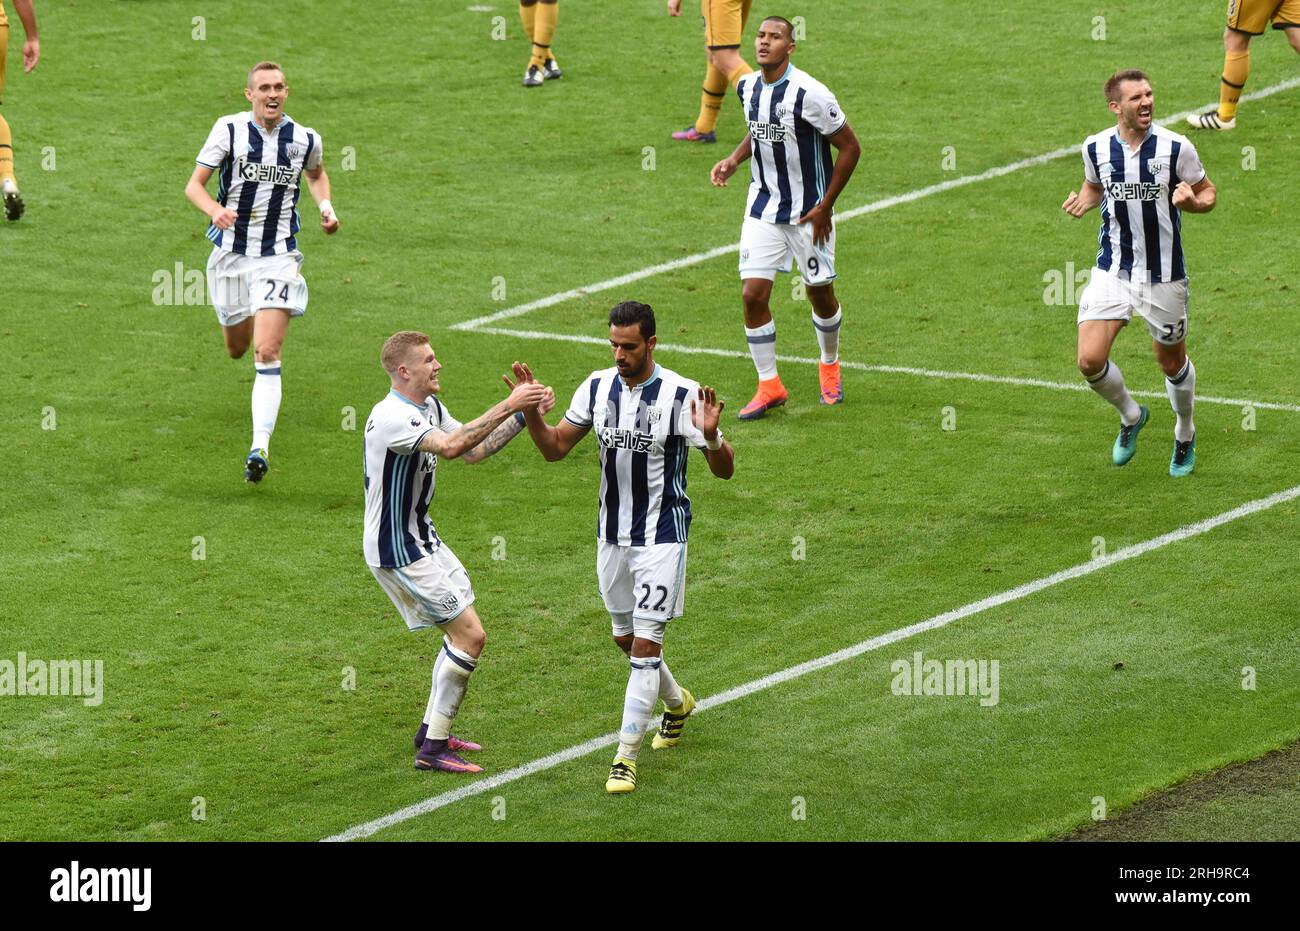 Nacer Chadli of West Bromwich celebrates after scoring a goal to make it 1-0 Premier League - West Bromwich Albion v Tottenham Hotspur 15/10/2016 Stock Photo